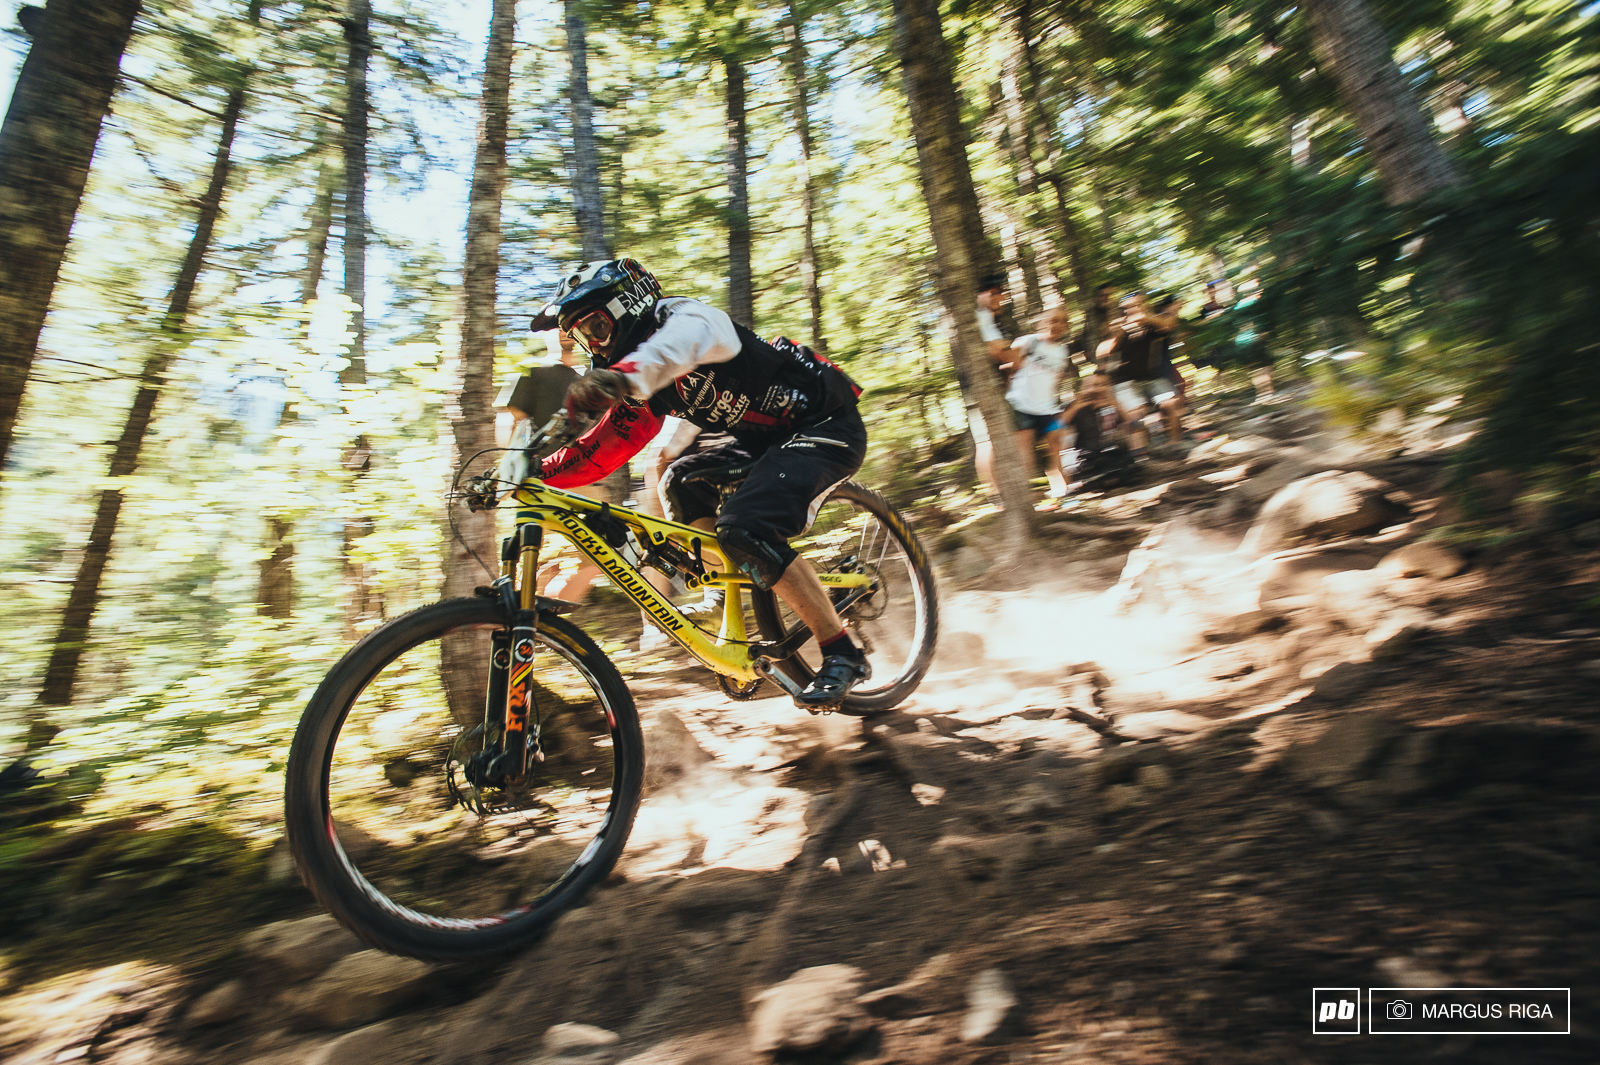 Local rider Jesse Melamed was the star of the morning. He wiped out three times on the first stage and still managed fifth. Then he won the second stage his first ever EWS stage win.